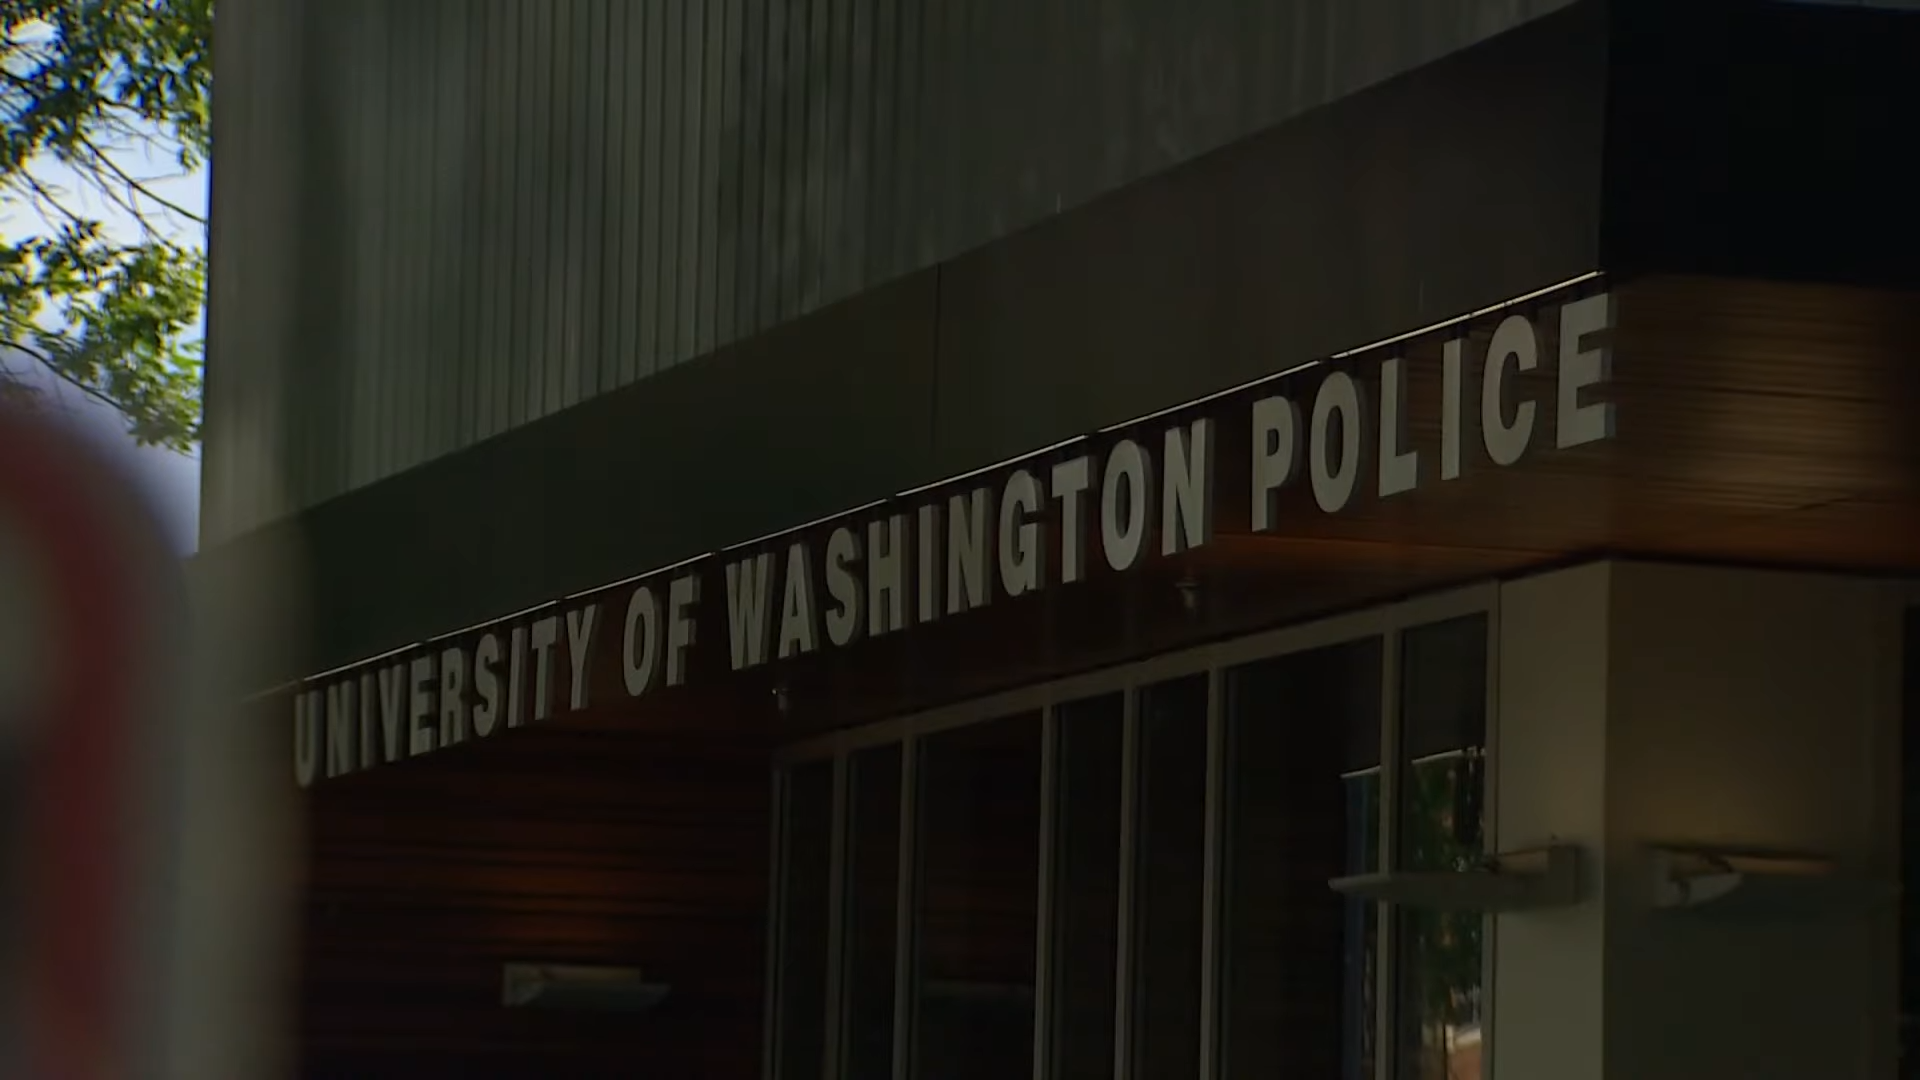 Trial set to begin after five Black University of Washington police officers sue school for racism